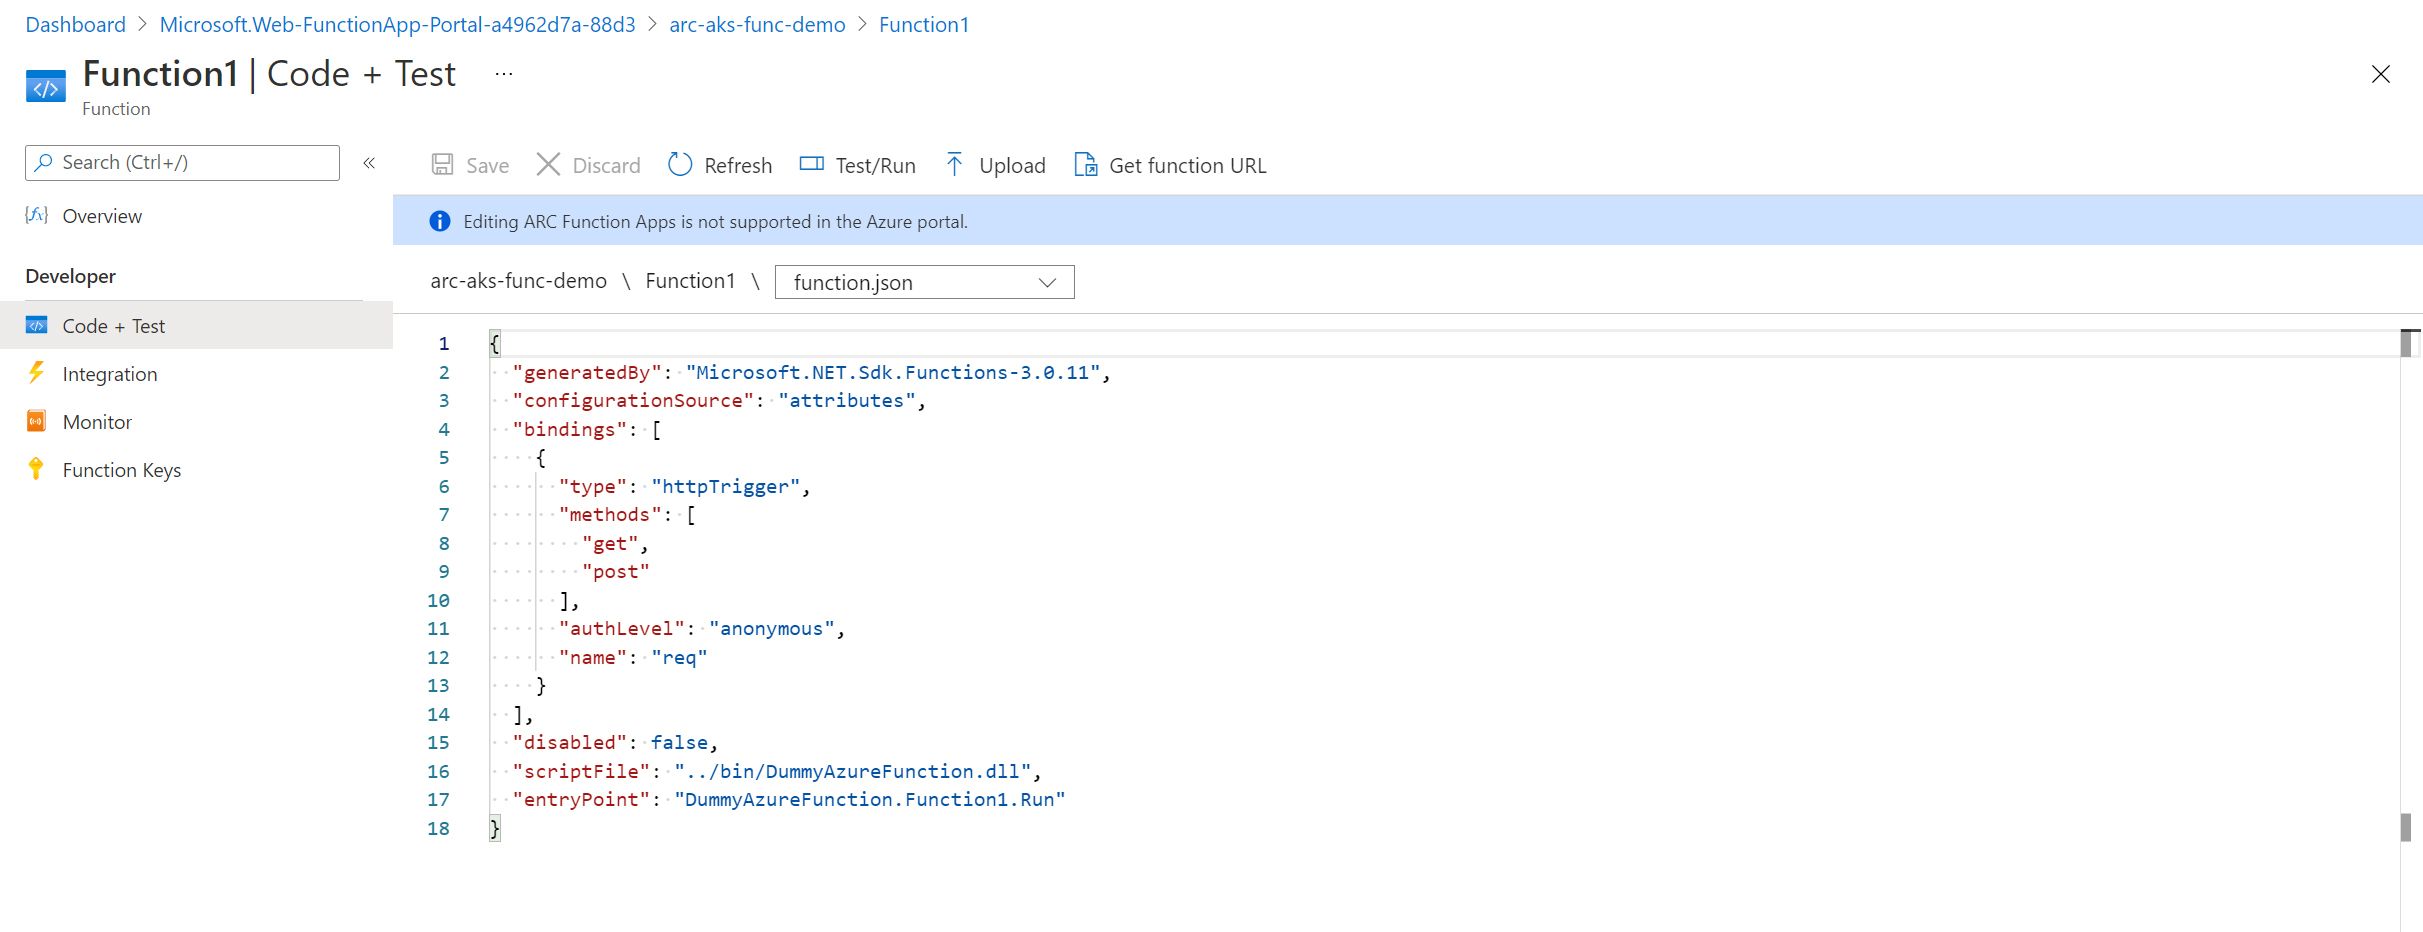 Screenshot showing the summary of a function within our Function App